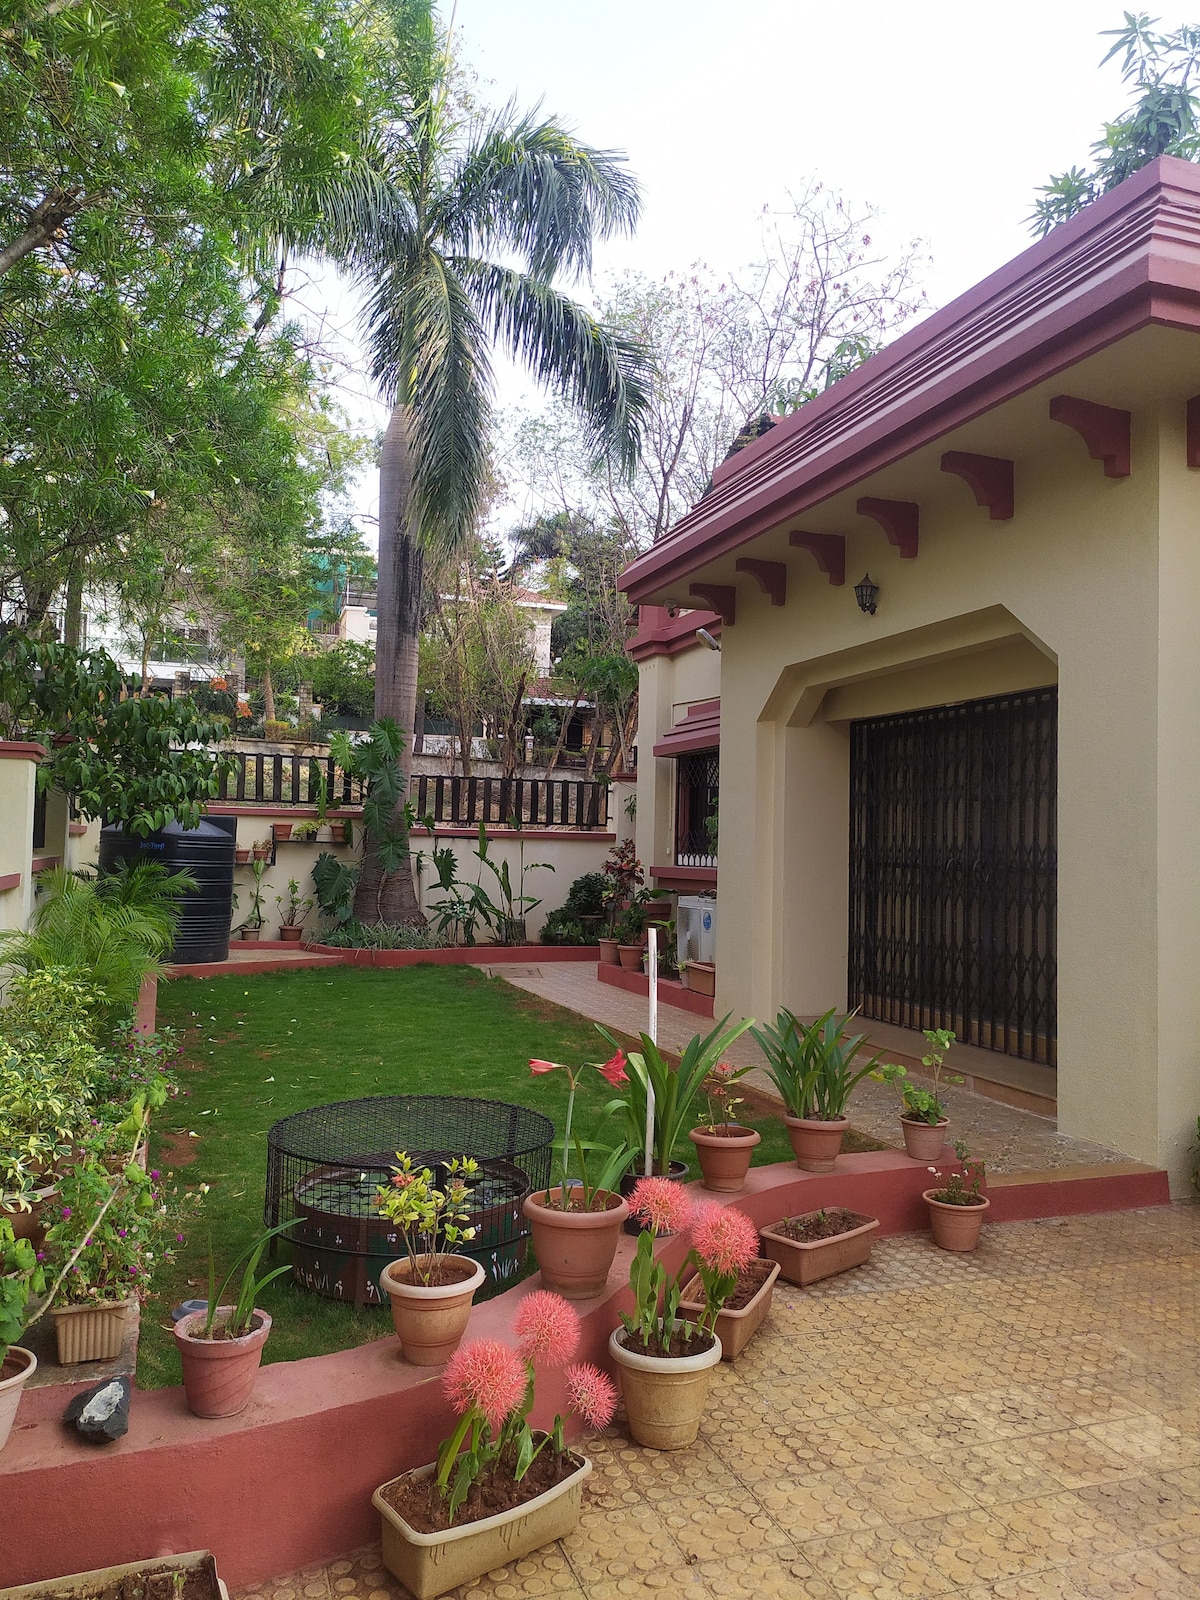 SAMIHA "Desire", for a peaceful stay in South Pune